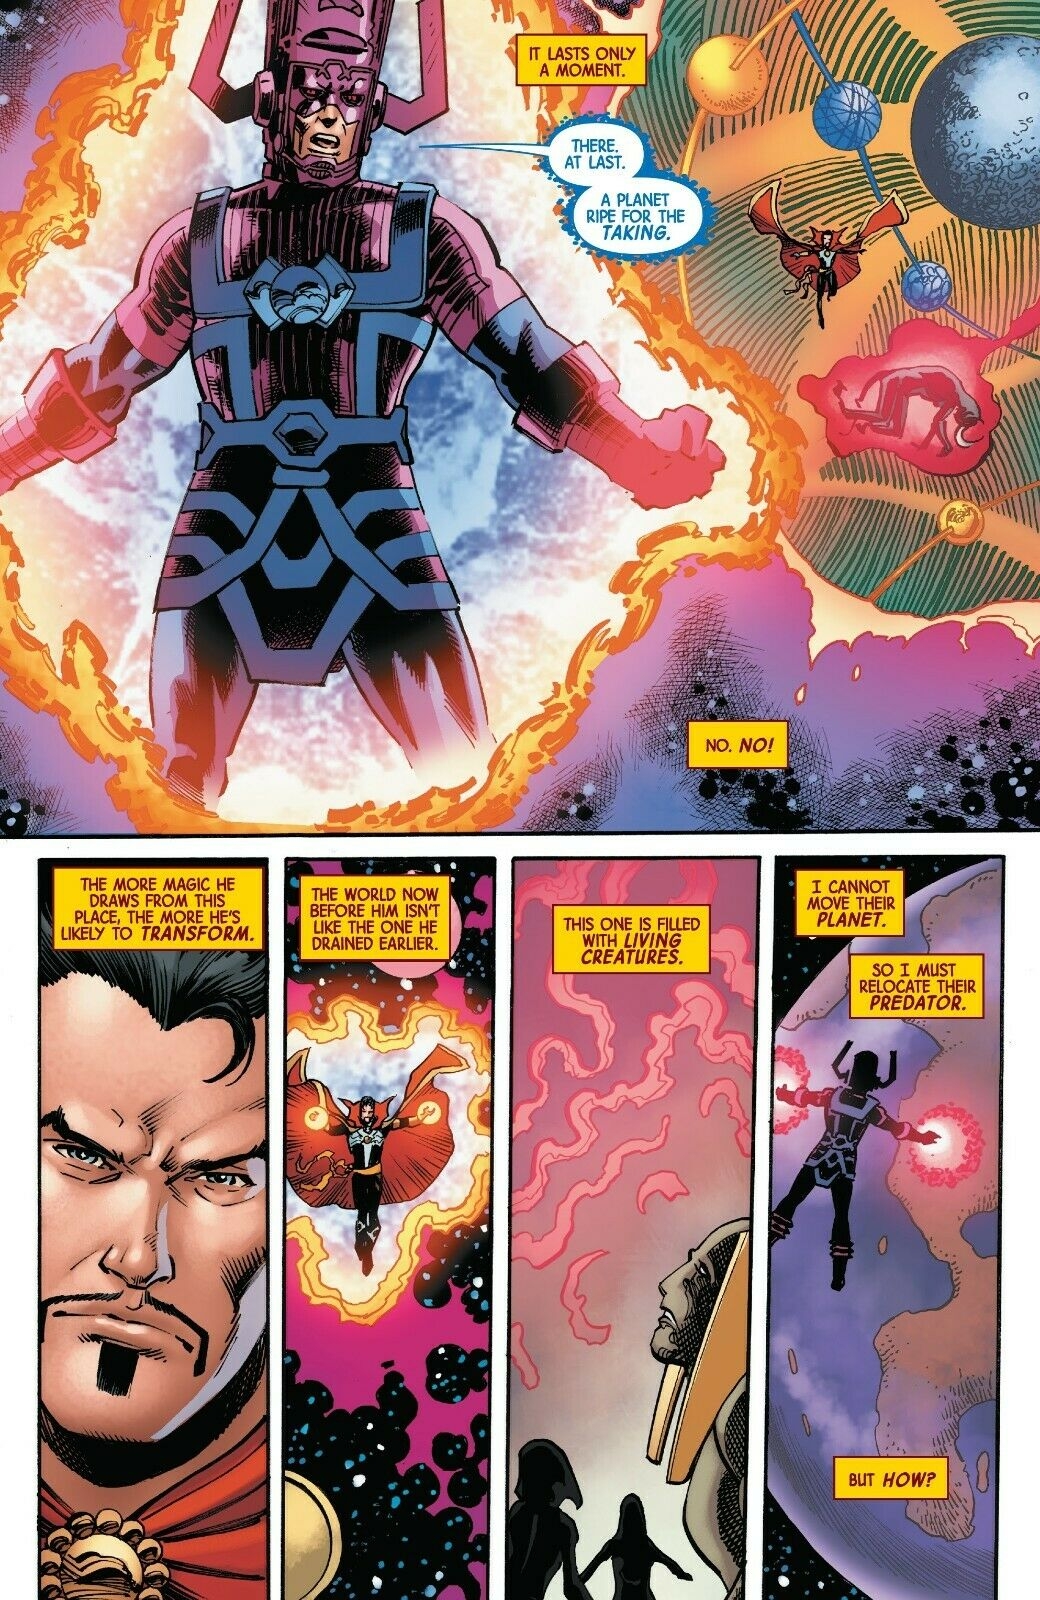 Doctor Strange #13 p6 (Galactus locates a planet ripe for the taking ...